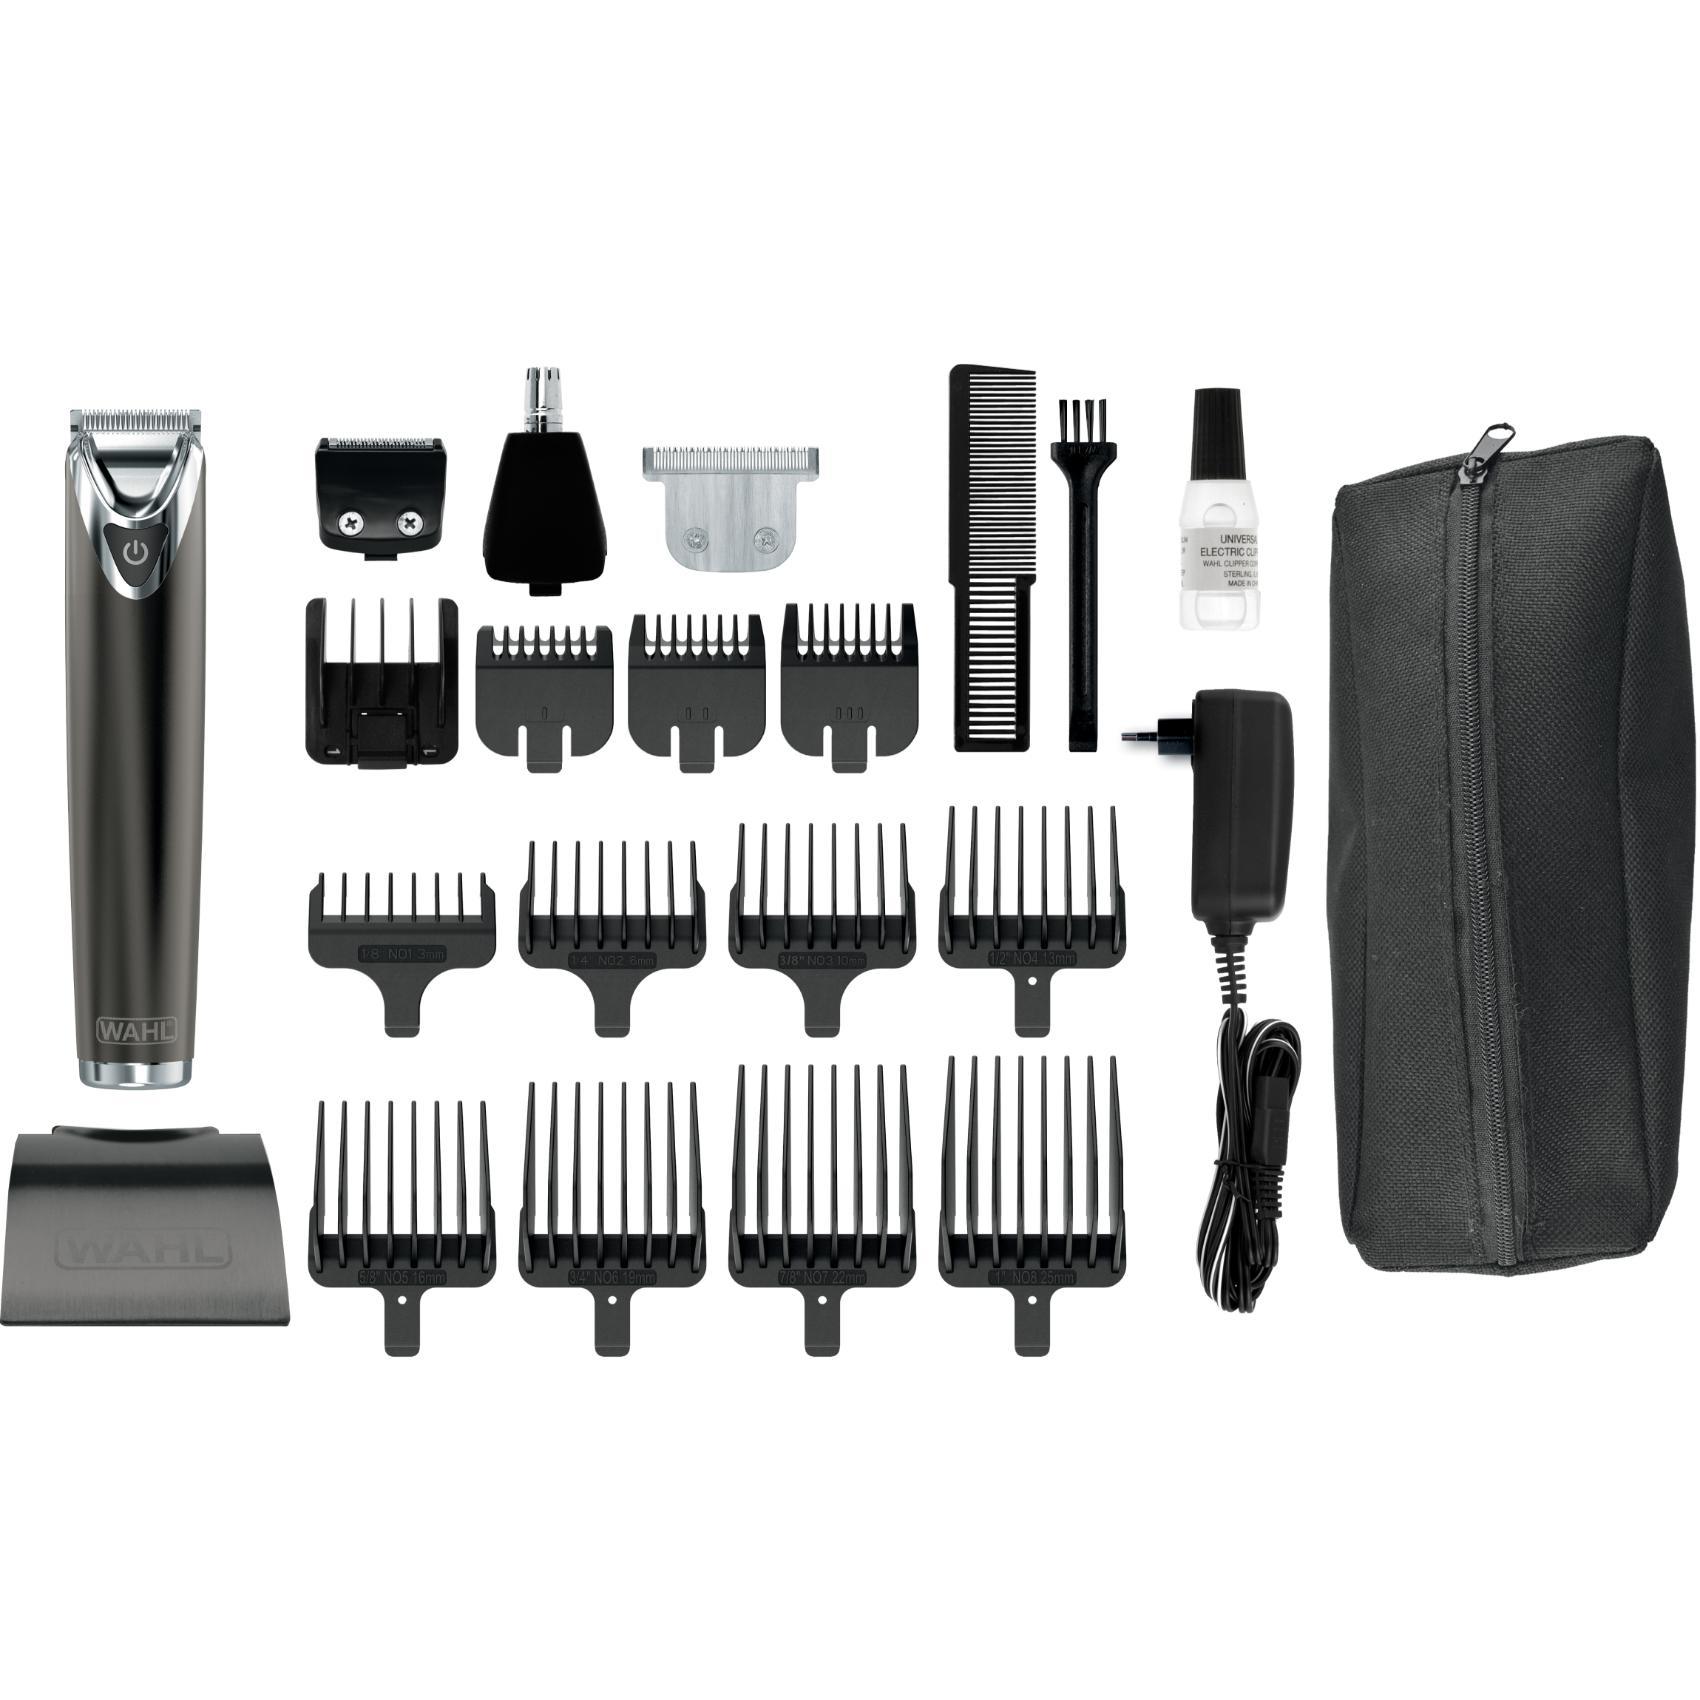 wahl lithium ion plus replacement parts